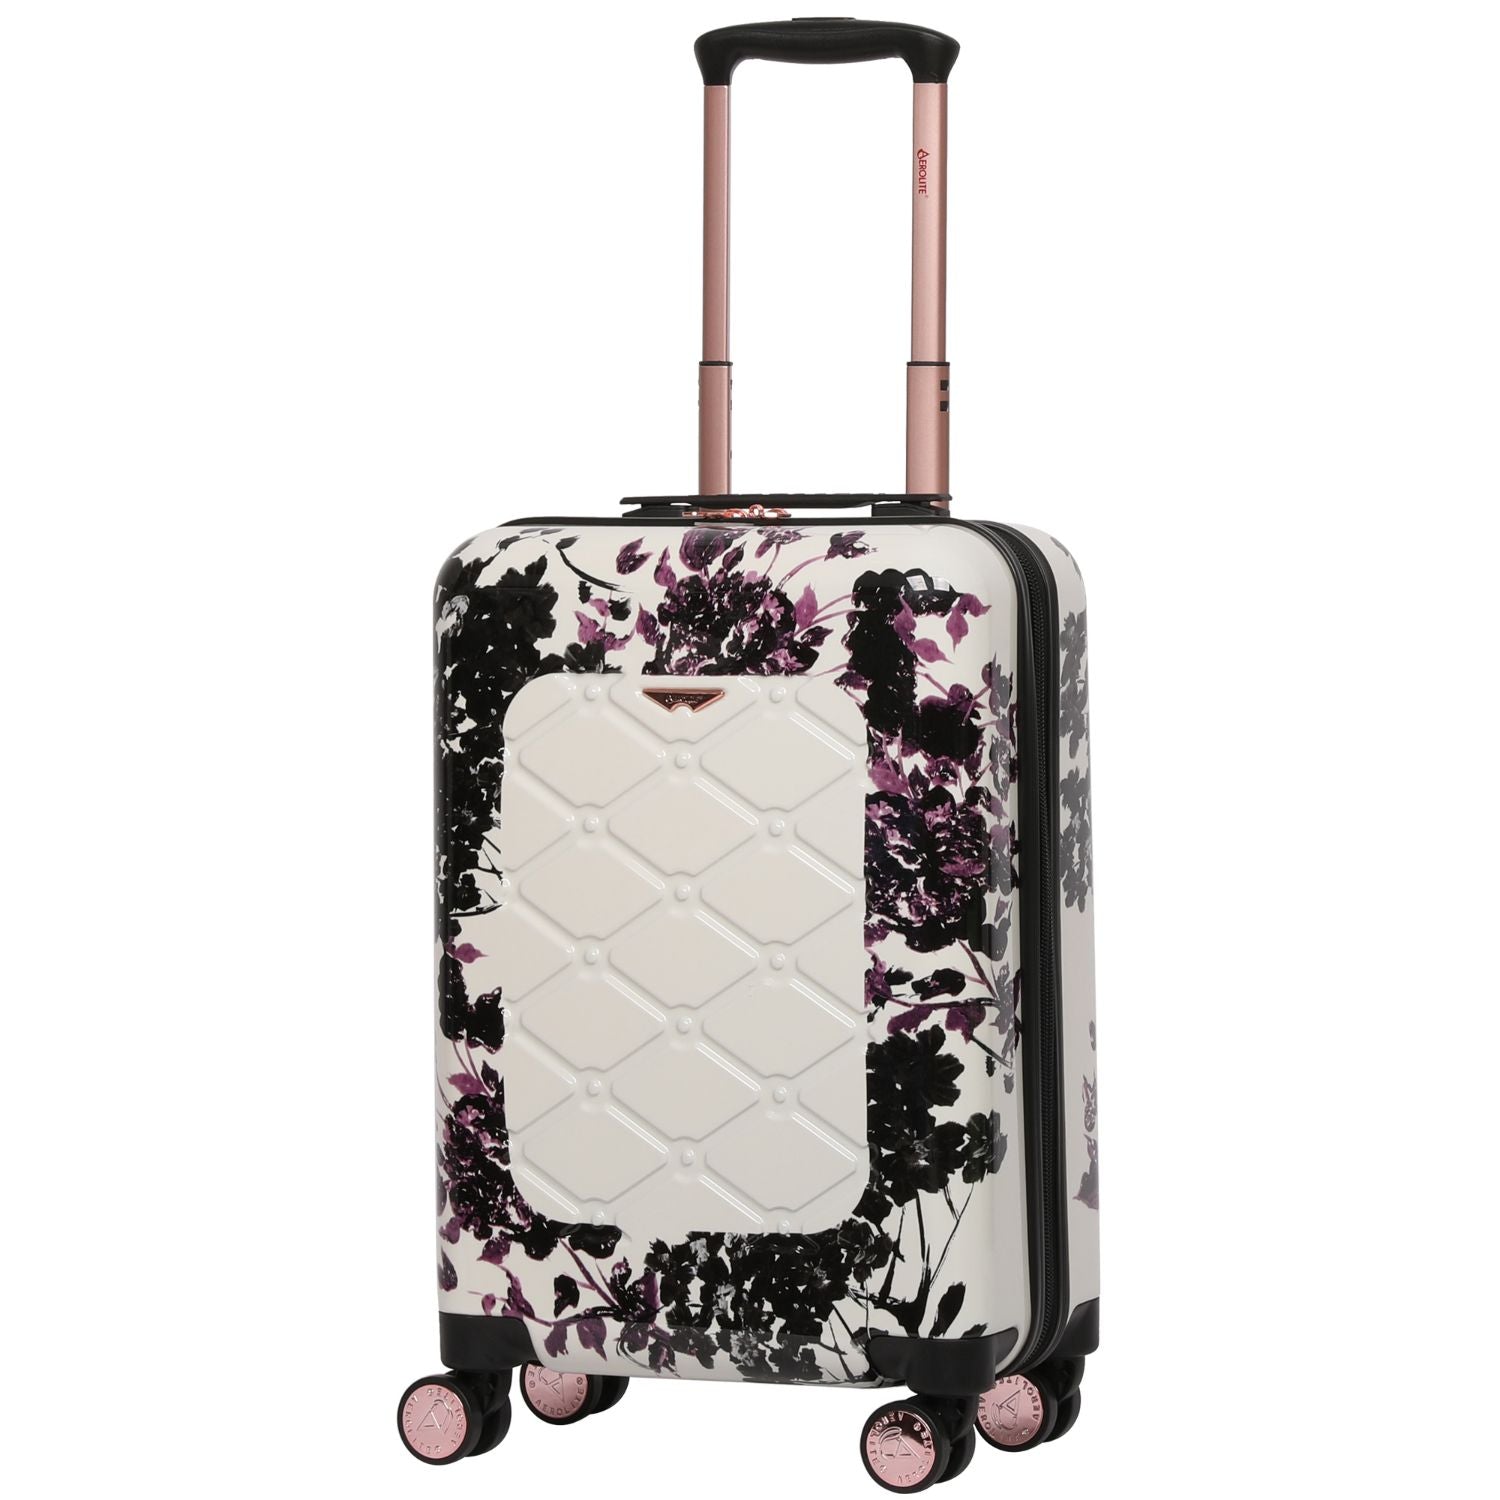 Aerolite (55x35x20cm) Premium Hard Shell Designer Cabin Suitcase, Approved For Ryanair (Priority), easyJet (plus/flexi/up front/extra legroom/large cabin upgrade), British Airways, Wizz Air, & Many More